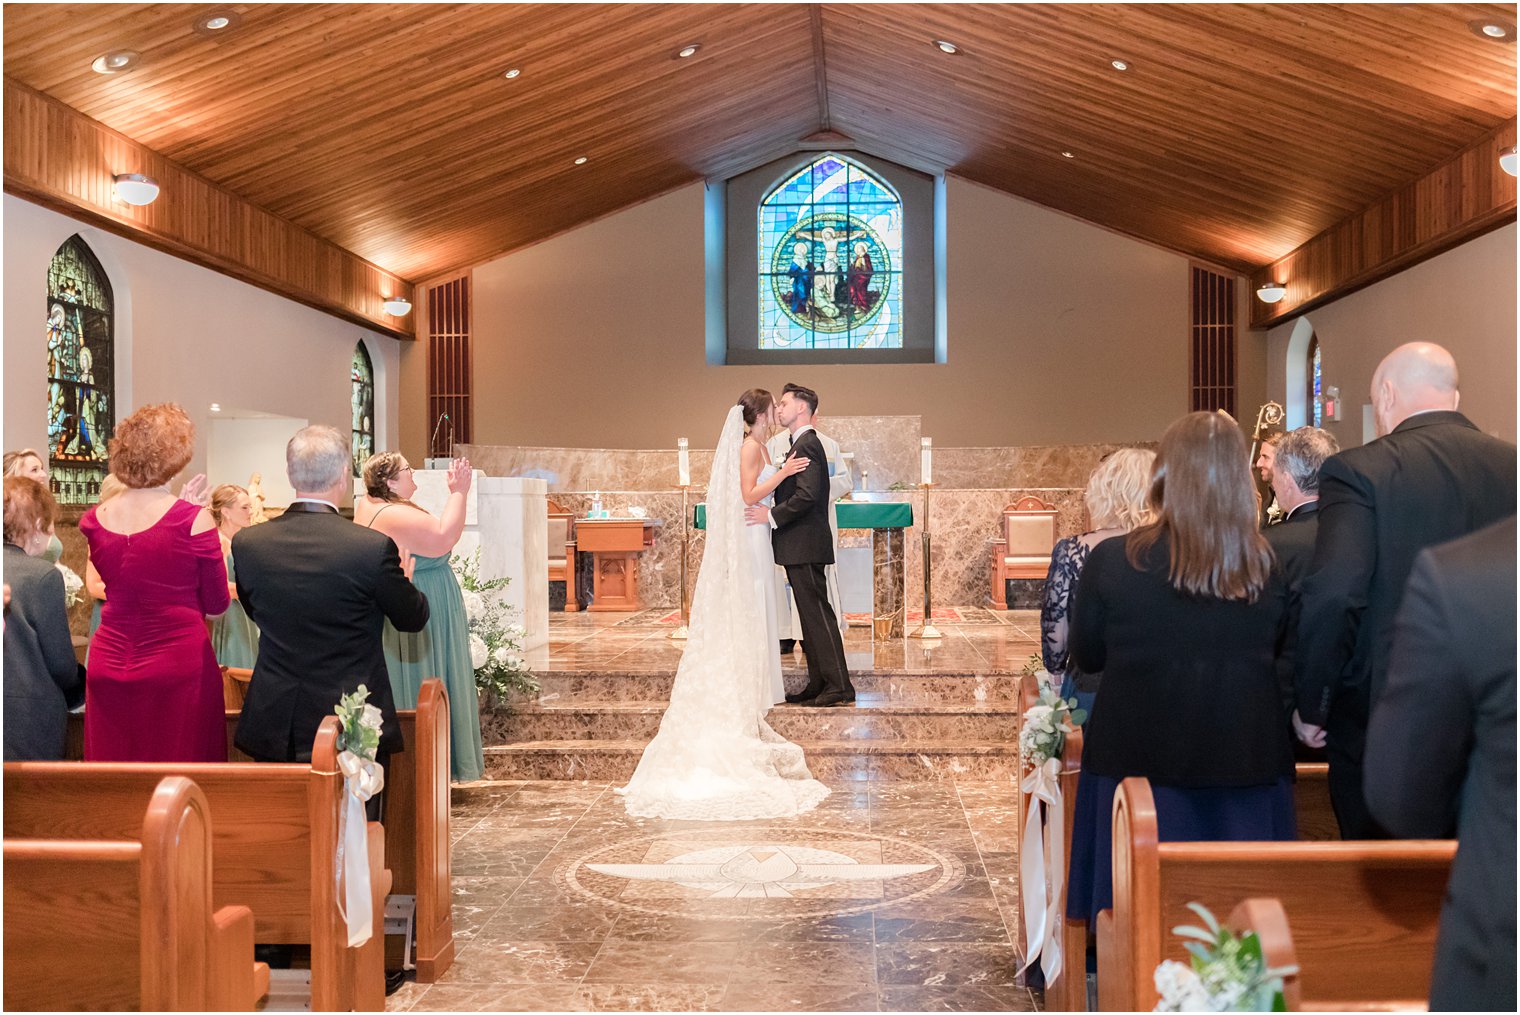 bride and groom kiss on alter during traditional church ceremony in small New Jersey church